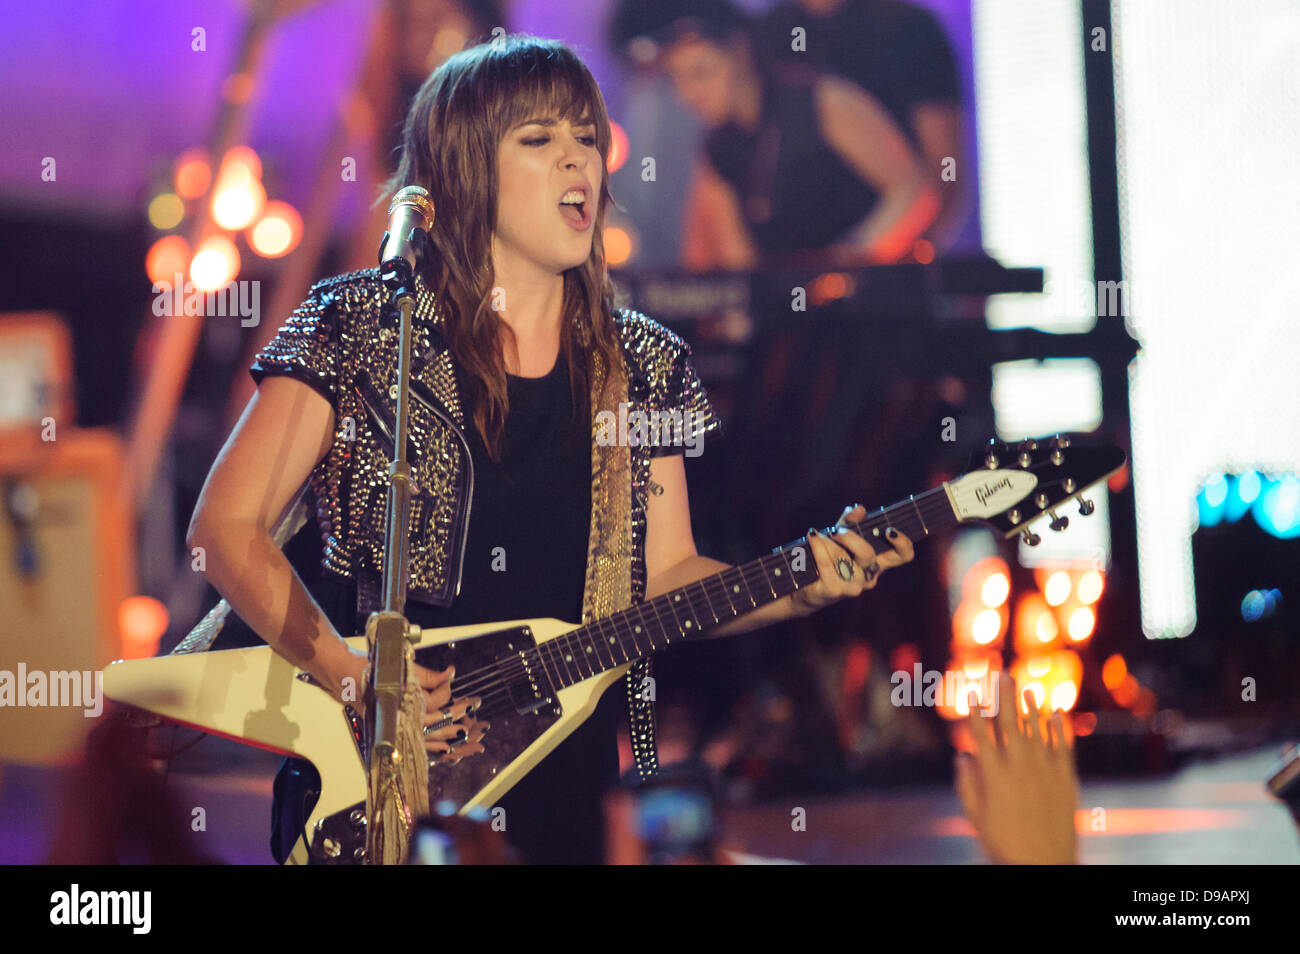 Toronto, Canada. 16th June, 2013. Serena Ryder performs at the 2013 MMVA in Toronto Canada. The MuchMusic Video Awards took over the trendy Queen West village in Toronto for an award show featuring PSY and other super stars including Avril Lavigne, Demi Lovato, Serena Ryder, Ed Sheeran, Marianas Trench, Classified, and Armin Van Buuren with Trevor Guthrie. Credit:  Victor Biro/Alamy Live News Stock Photo